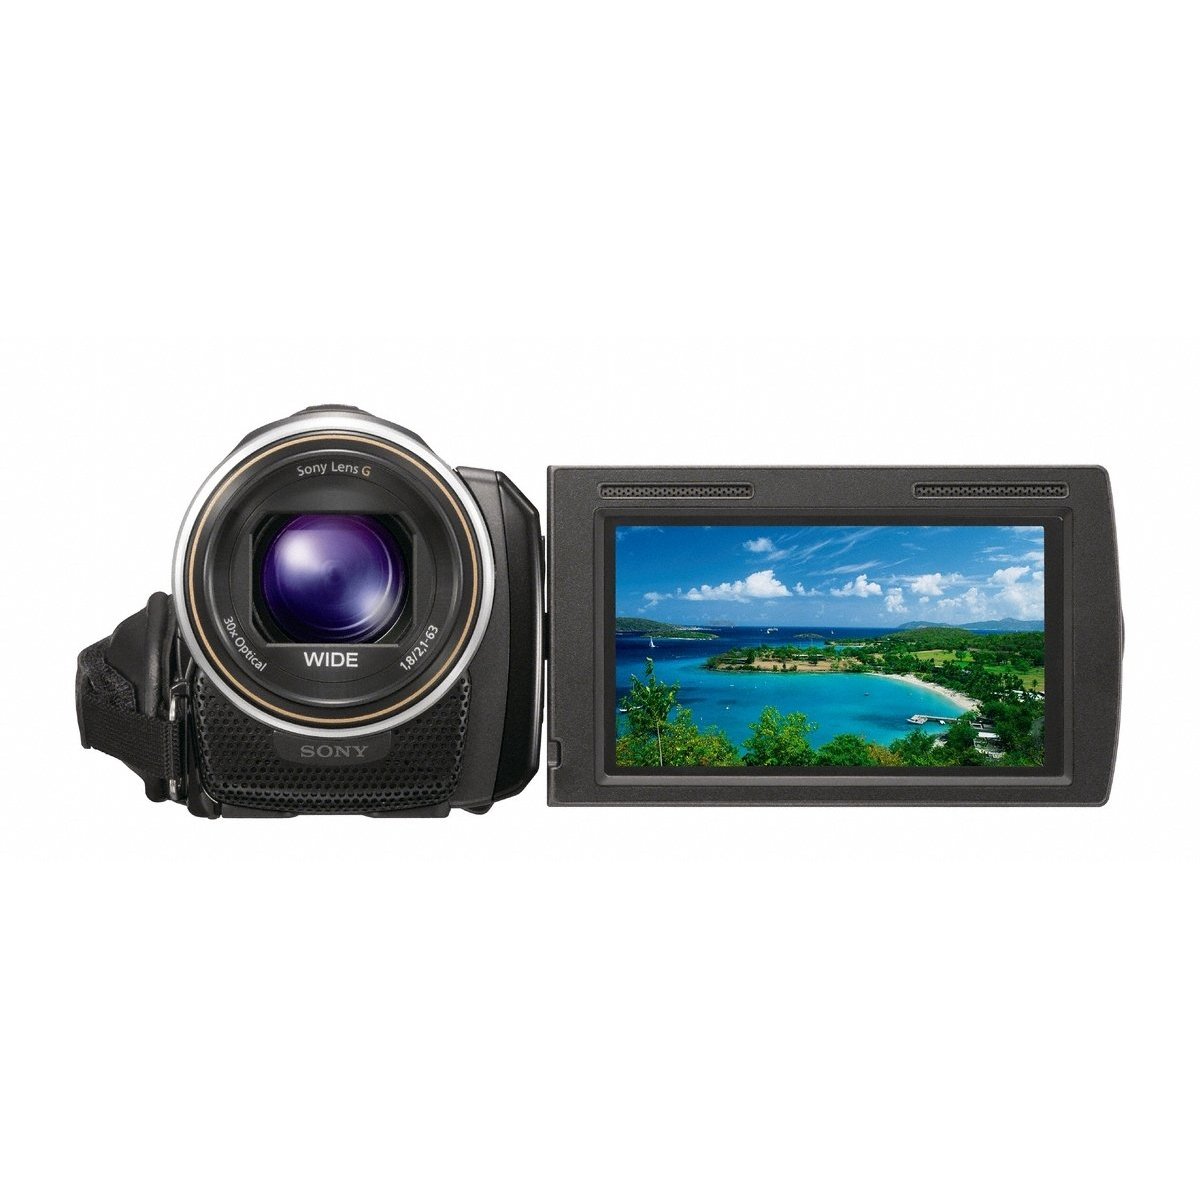 http://thetechjournal.com/wp-content/uploads/images/1110/1317694084-sony-hdrpj10-high-definition-handycam-camcorder-with-projector-3.jpg